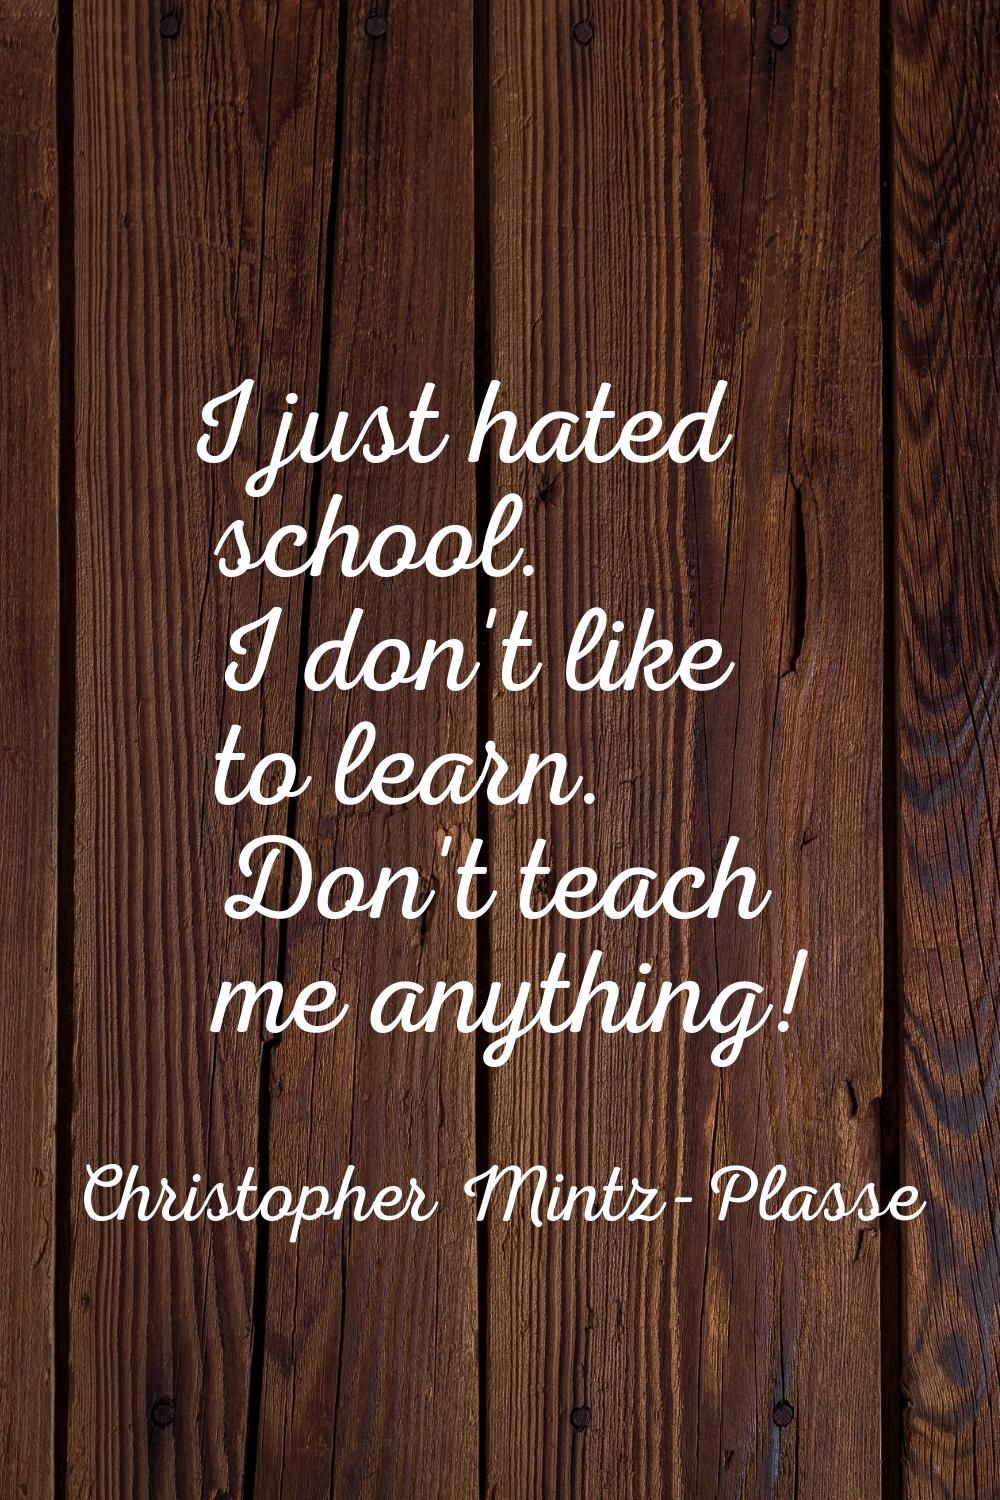 I just hated school. I don't like to learn. Don't teach me anything!